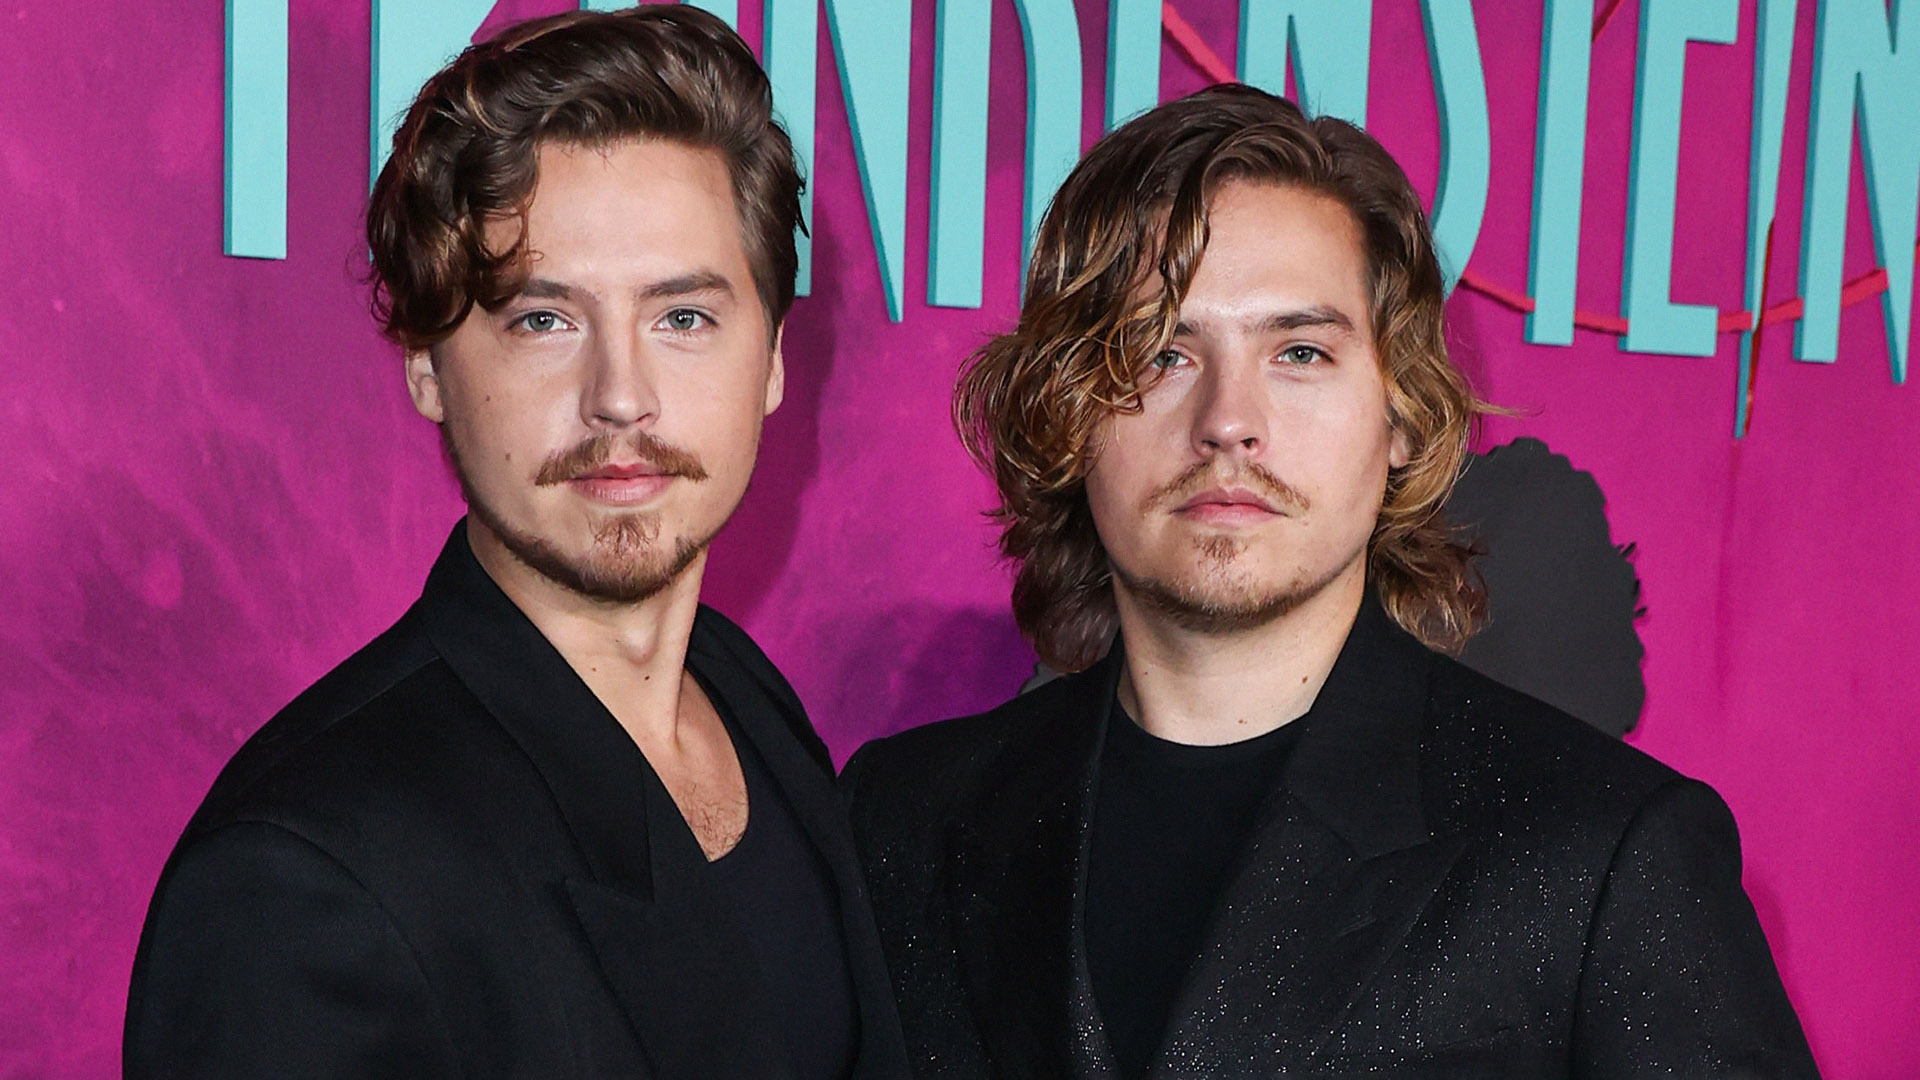 Why Would the Sprouse Brothers Be Embarrassed to Meet Matt Damon Again?